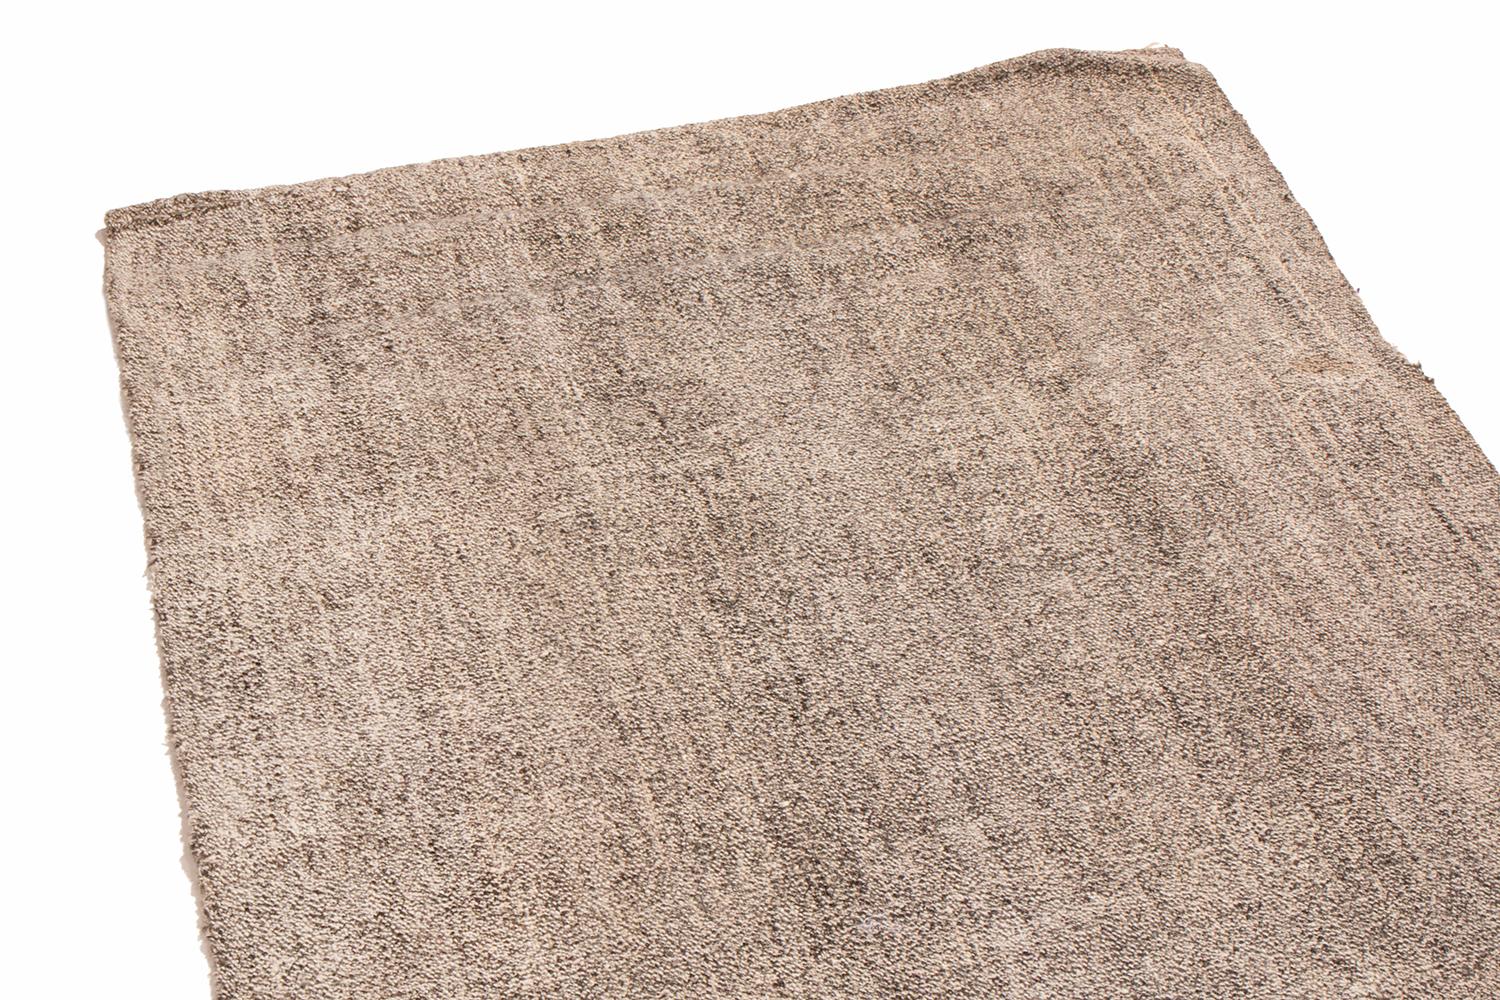 Originating from Turkey in 1960, this vintage wool Kilim runner is flat-woven in high quality wool with subtly rectilinear, vertically oriented abrash of Industrial and metallic gray and silver colorways.
  